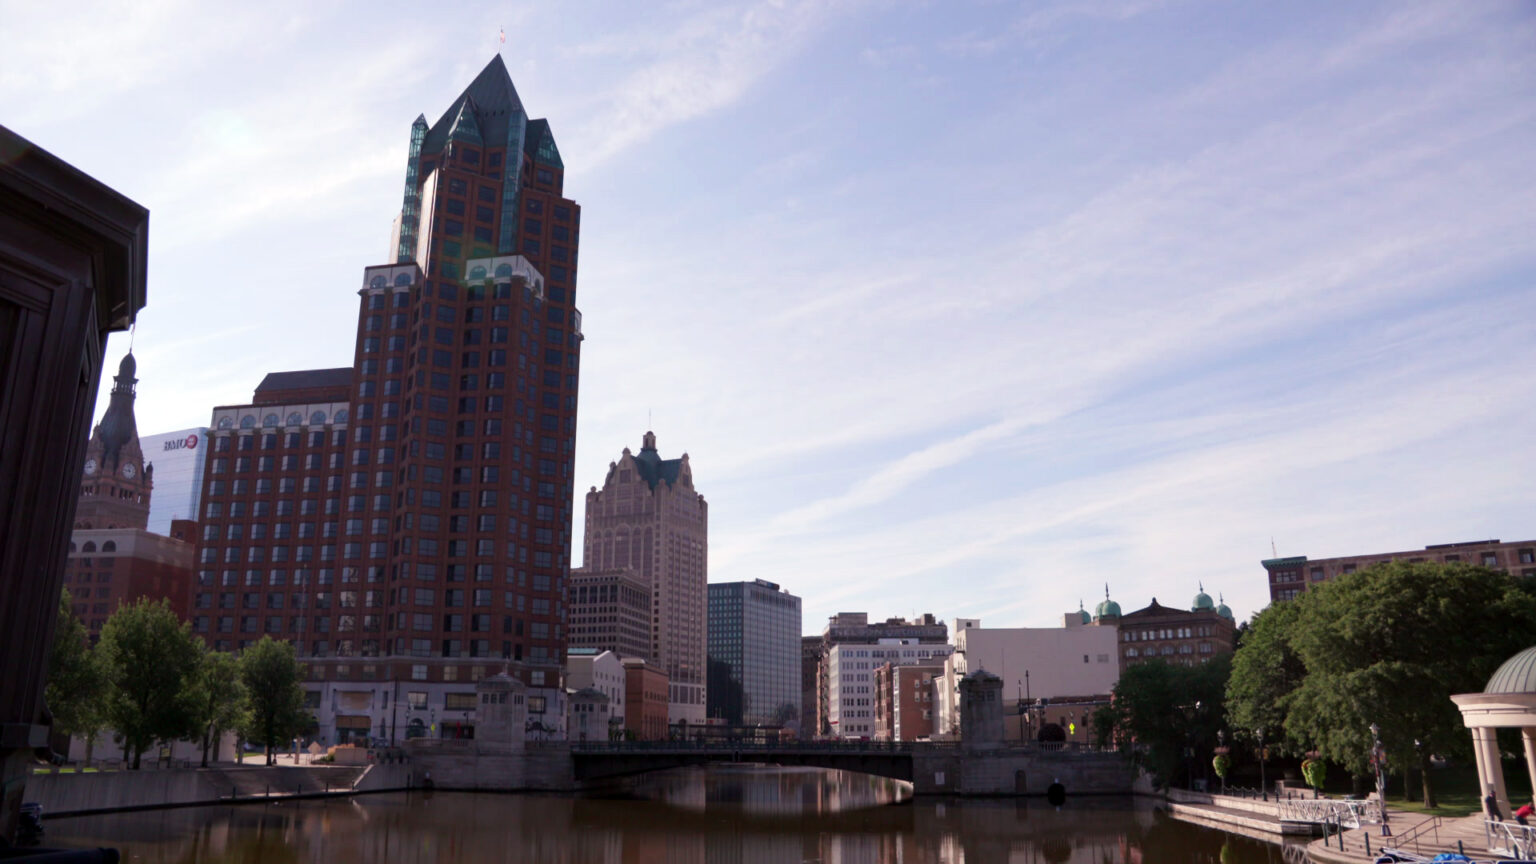 Skyscrapers and other buildings line the east and west shores of the Milwaukee River as it flows through the city's downtown.